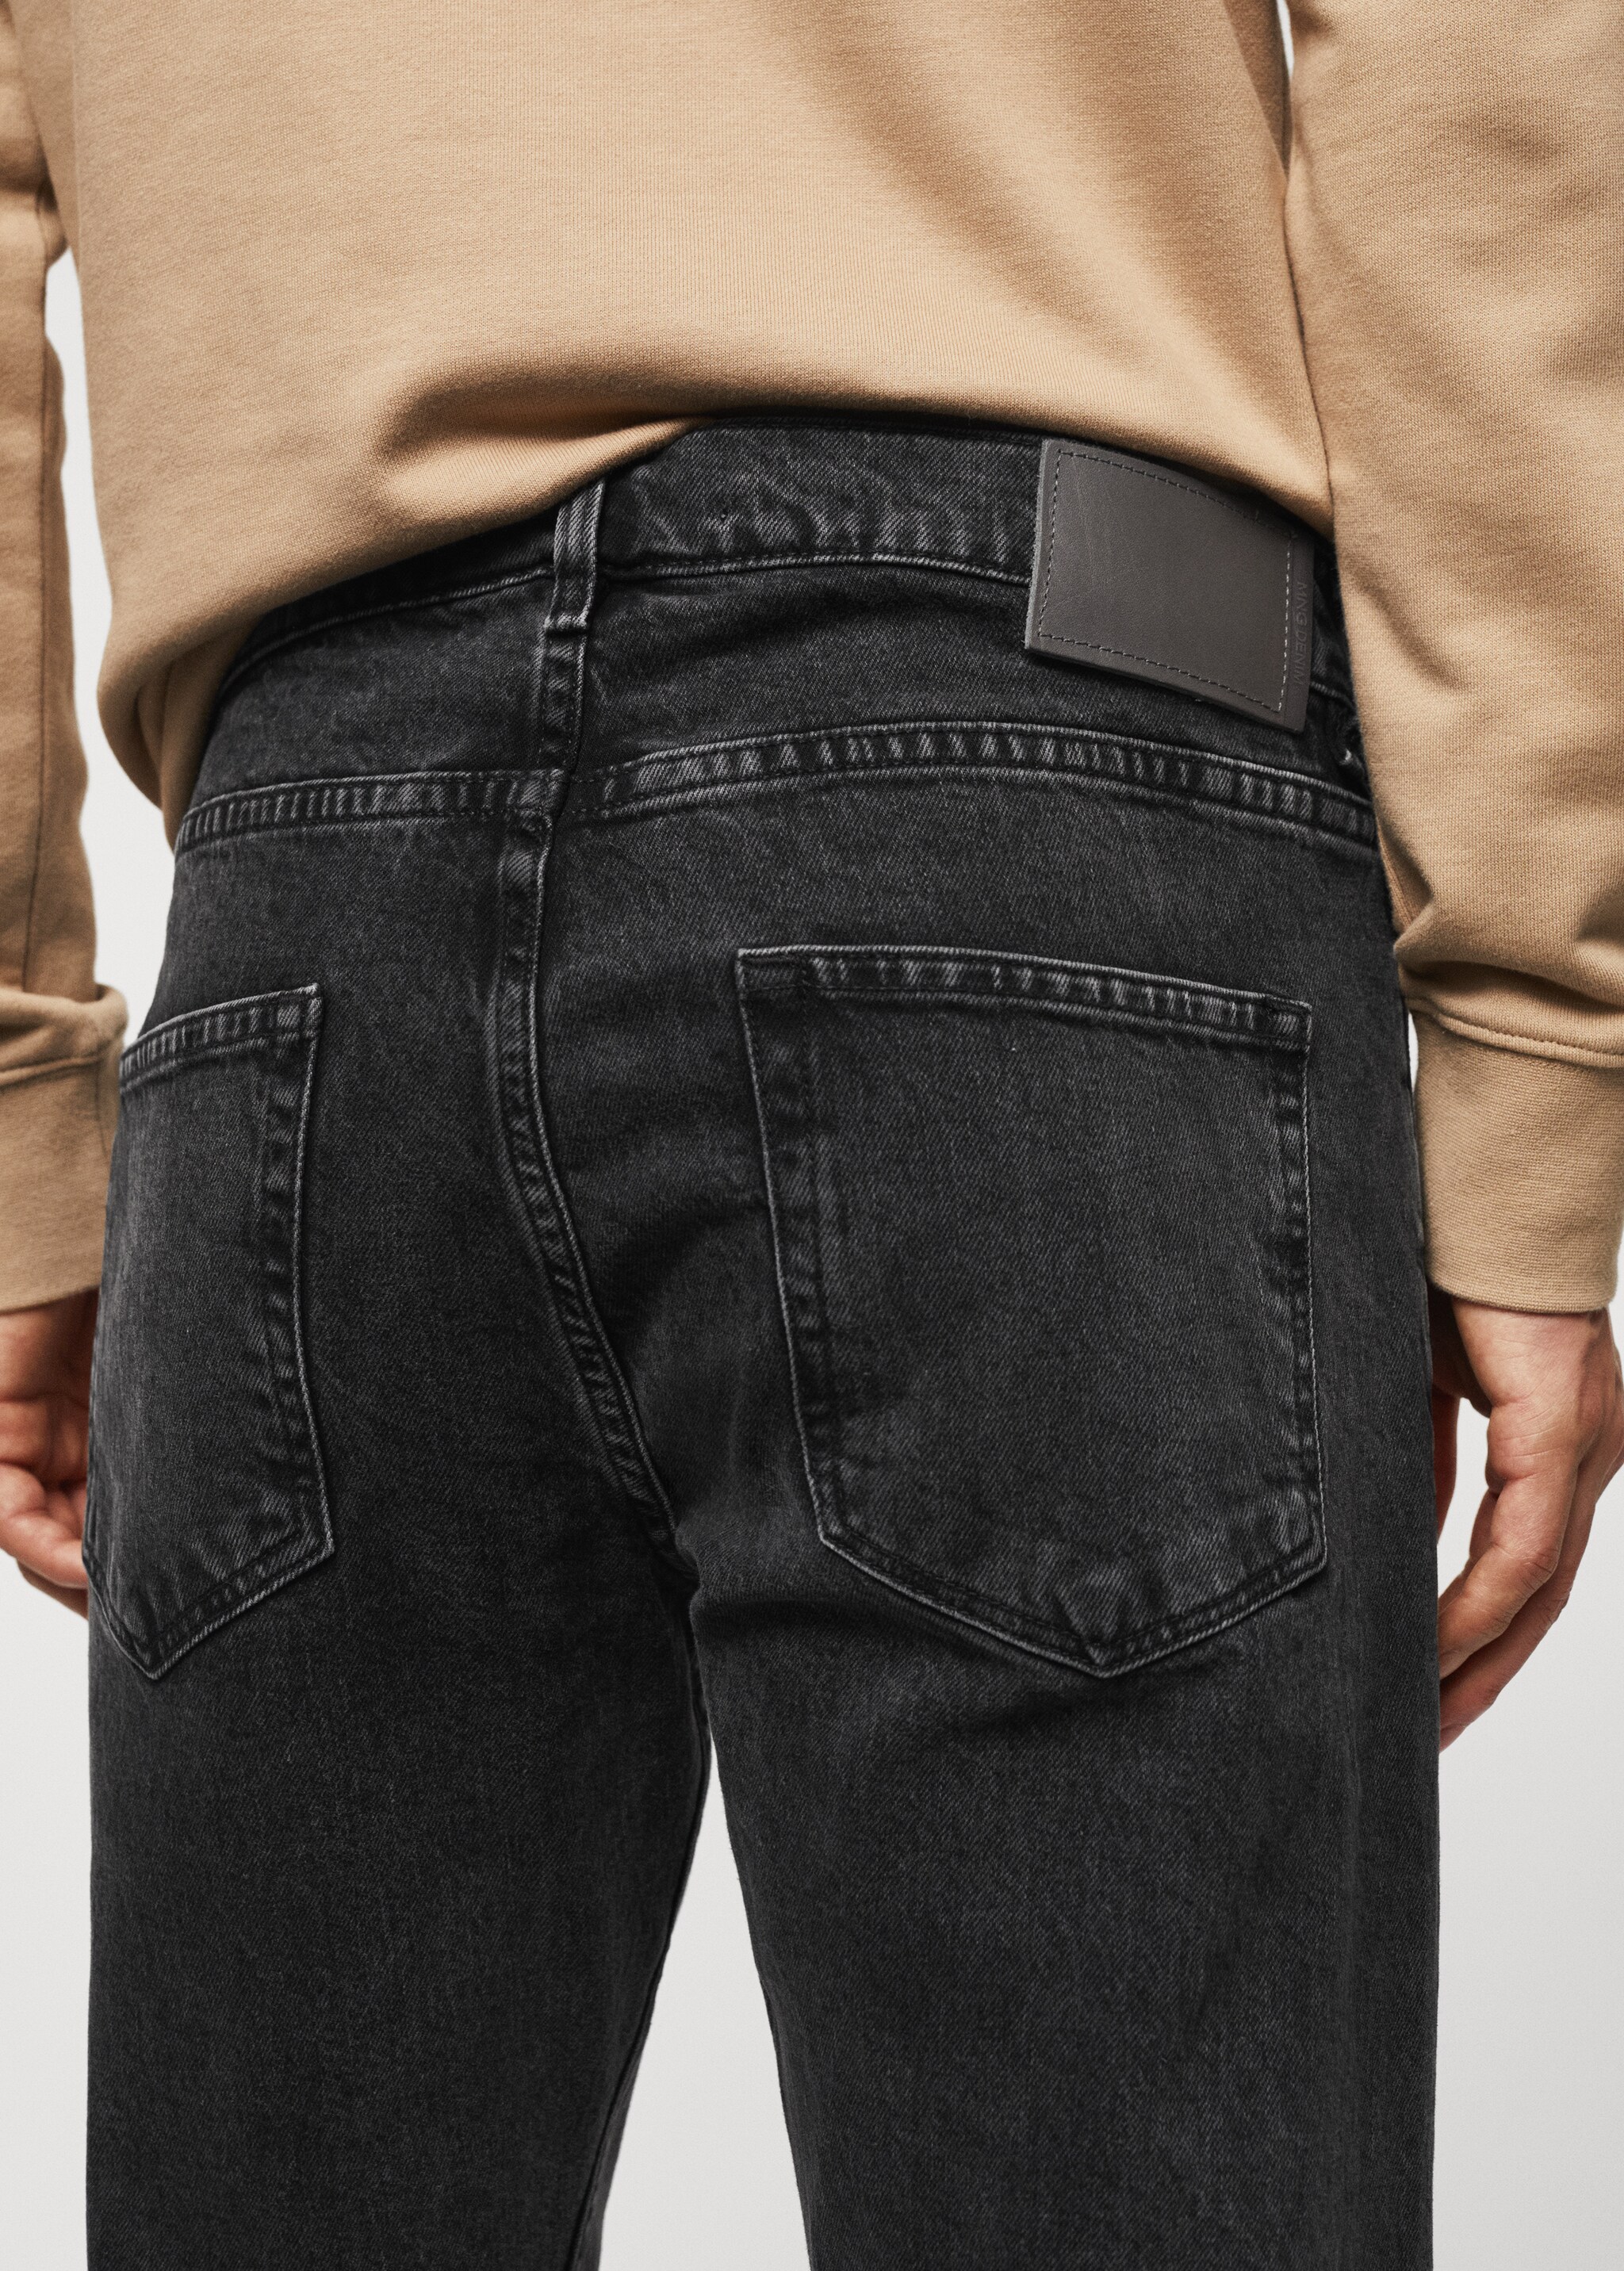 Ben tapered cropped jeans - Details of the article 3